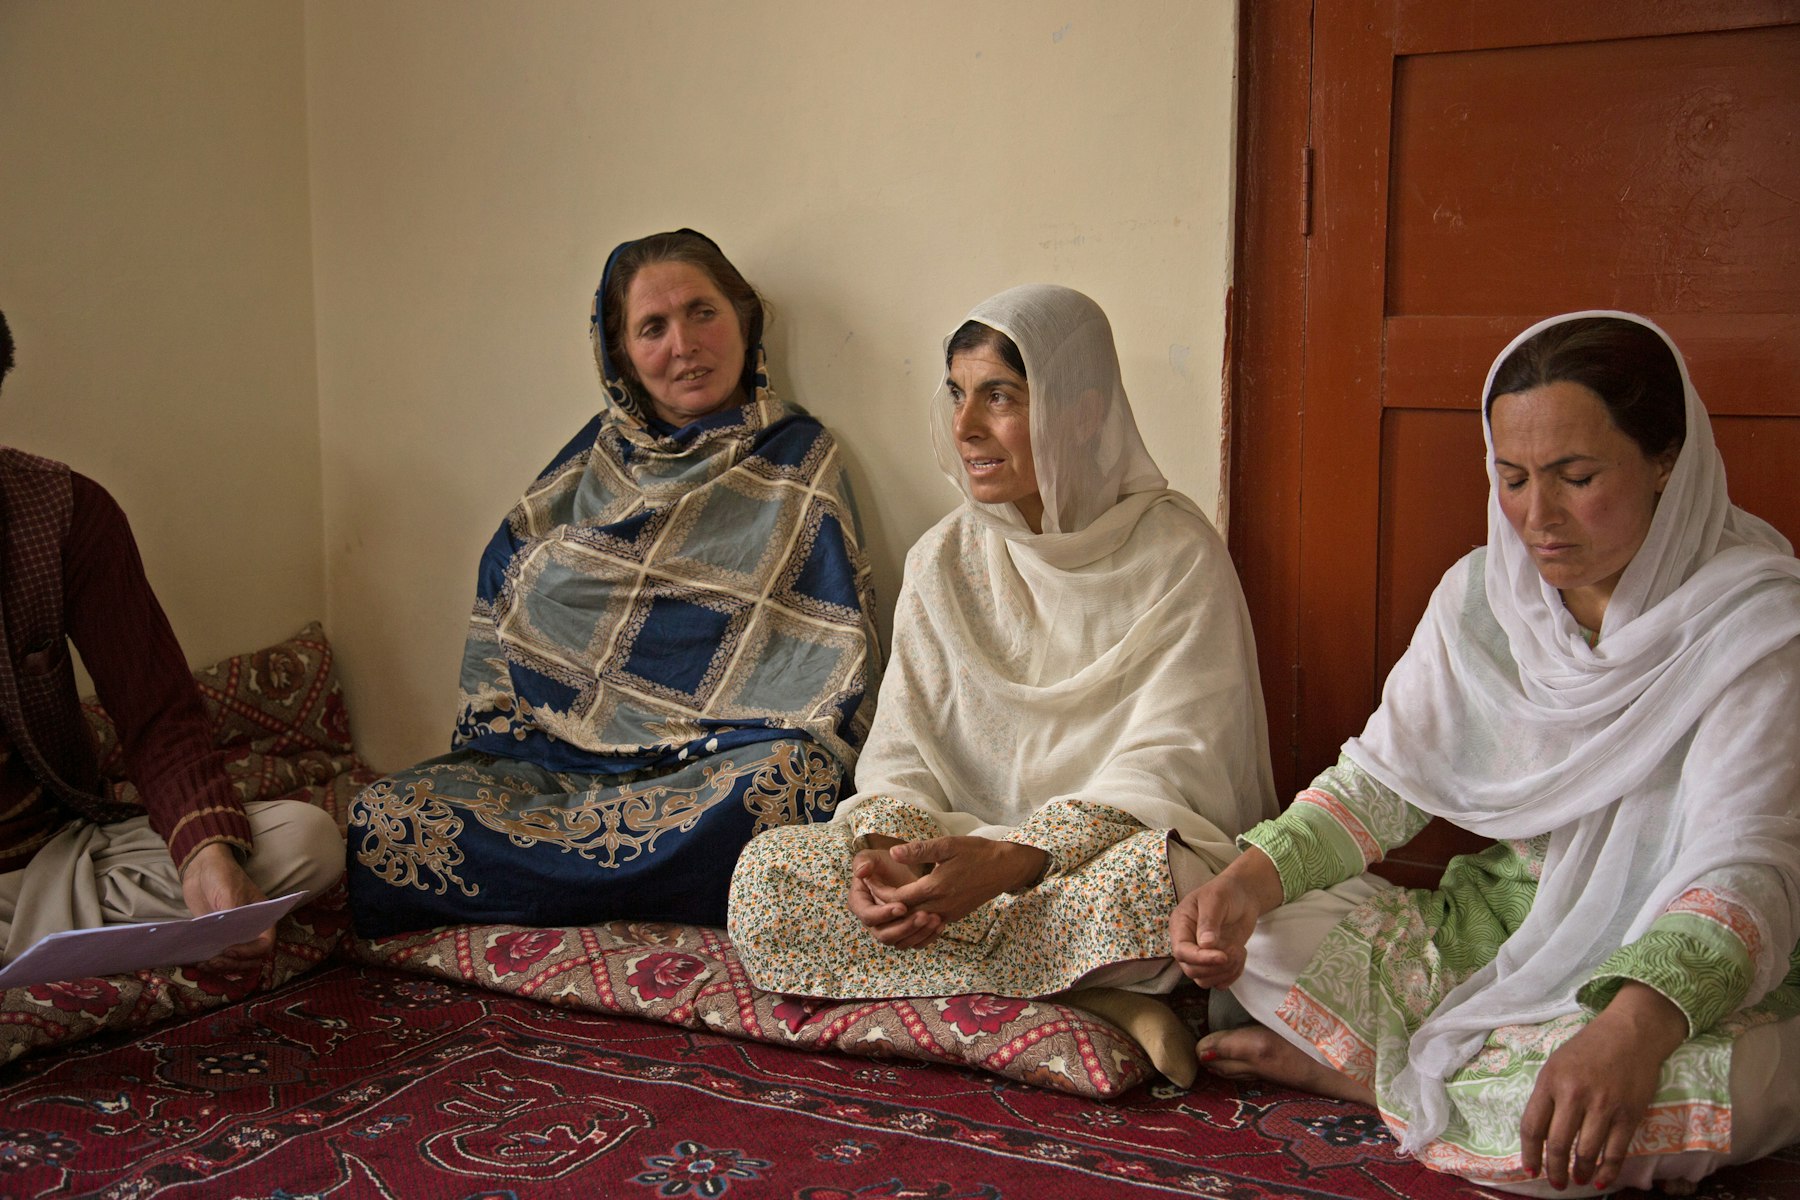 Gul Mahoor (centre) manages a health relief fund in Nasirabad, Pakistan.